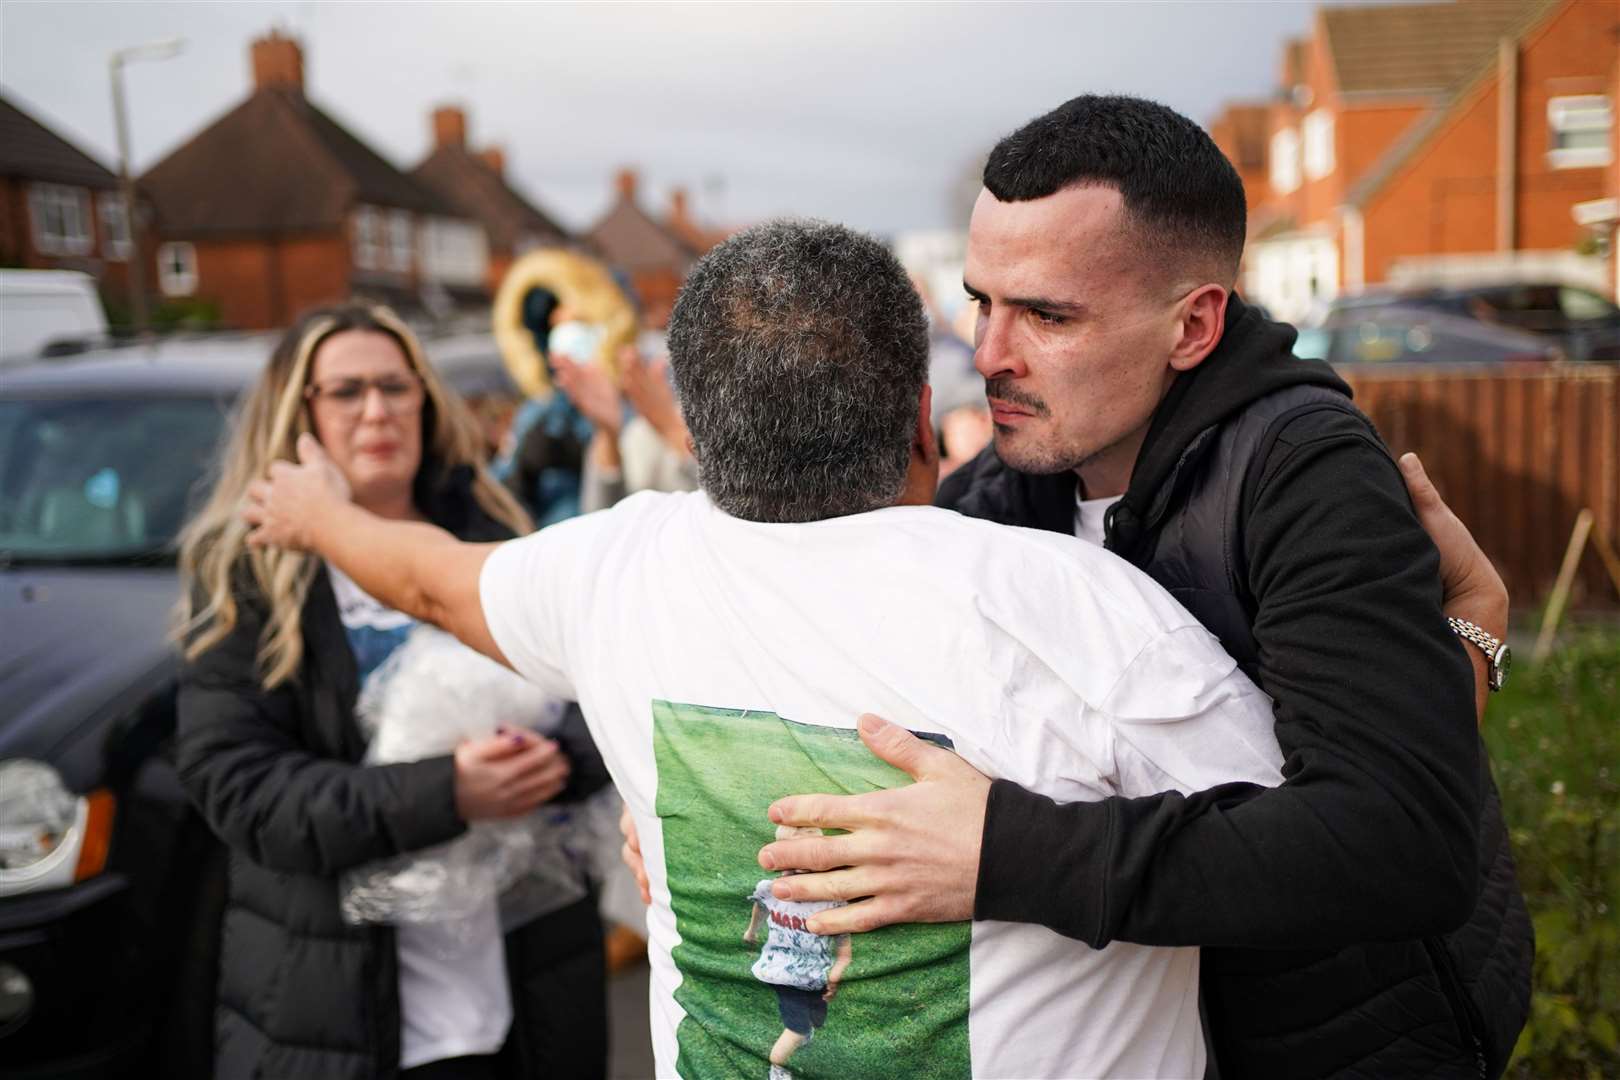 Family and friends embrace in the street (Jacob King/PA)